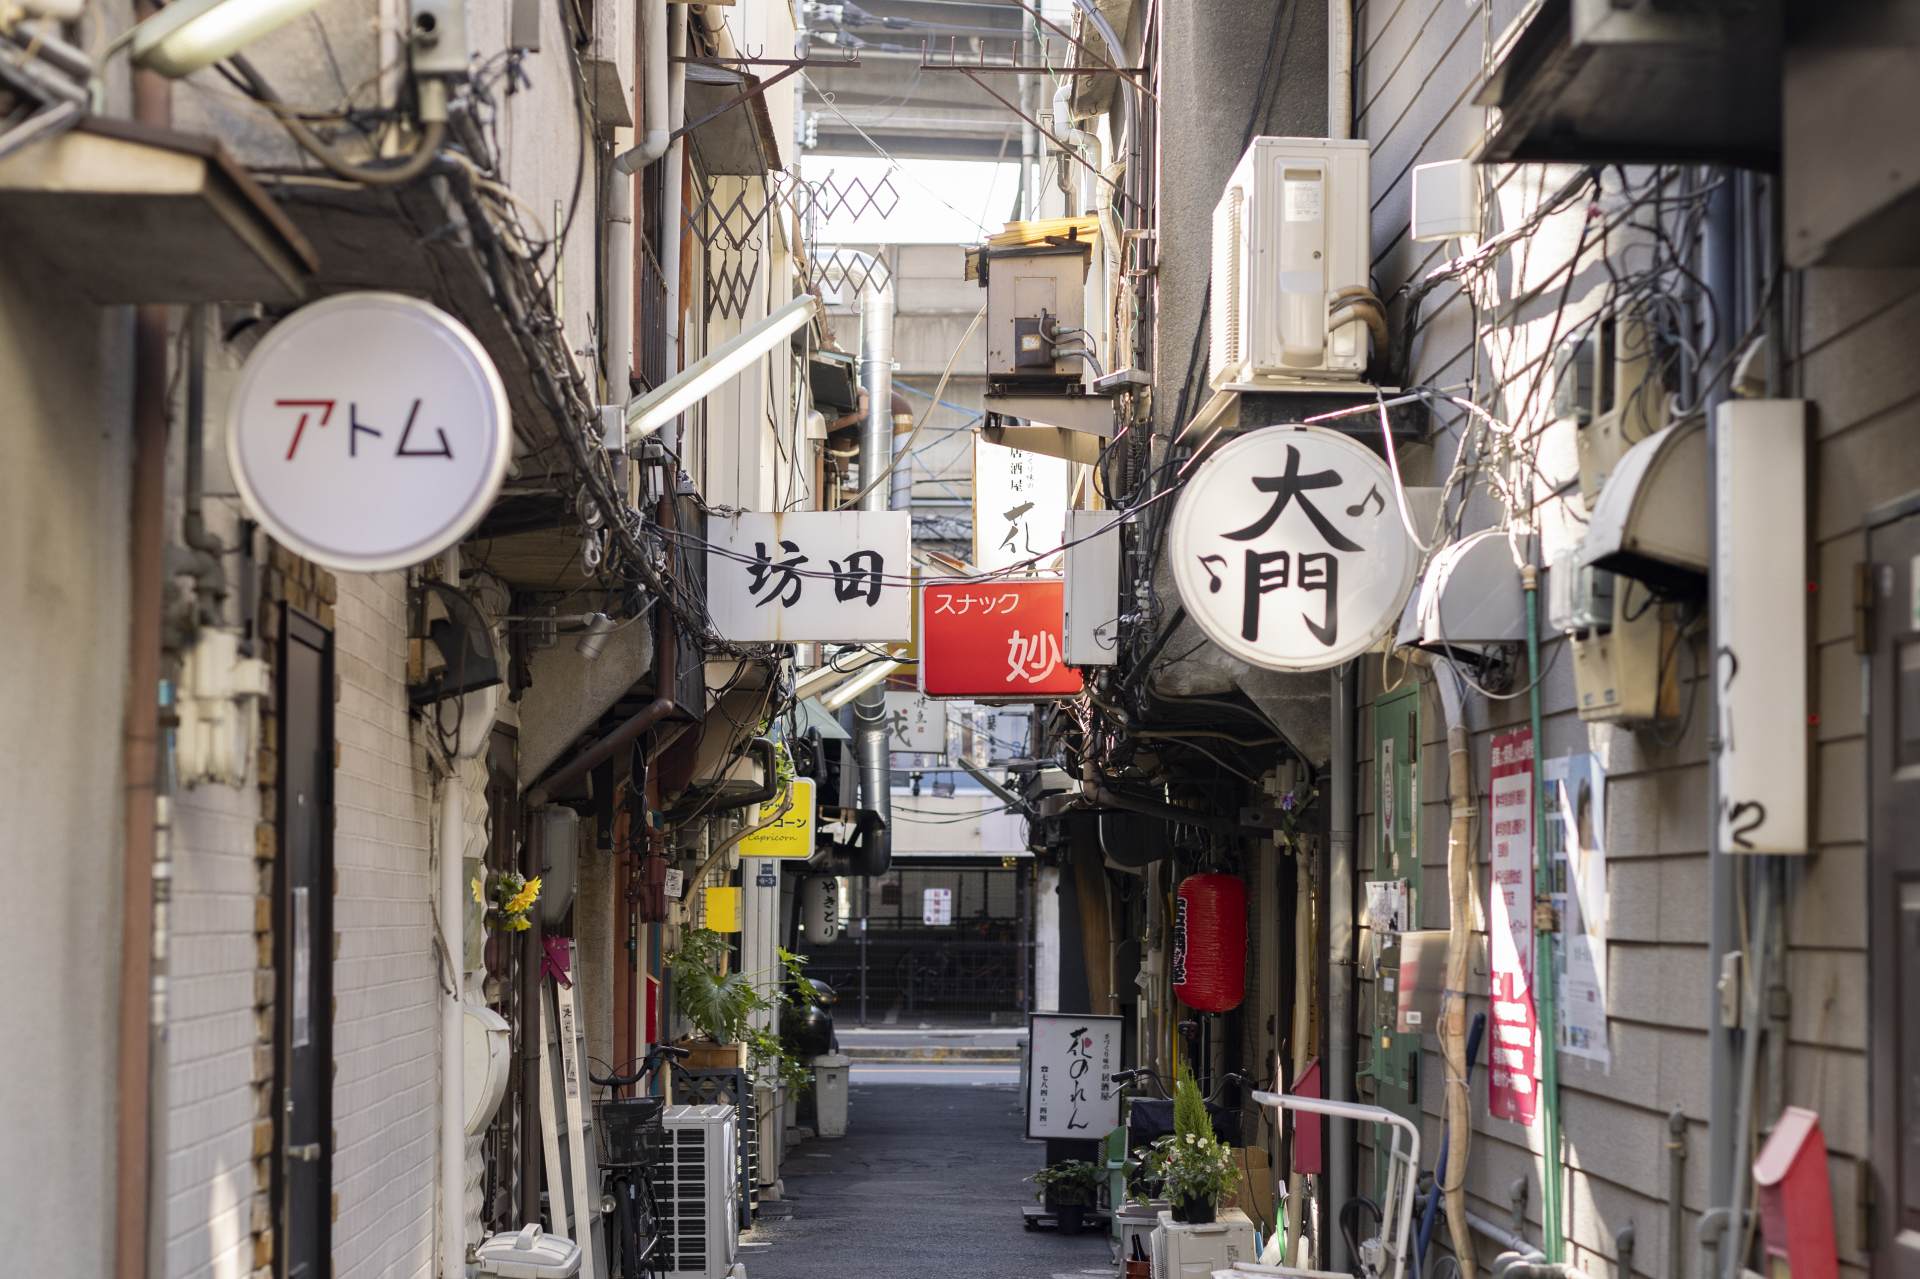 Alleys full of retro bars: they are a fascinating aspect of Japan’s nightlife that should be preserved.